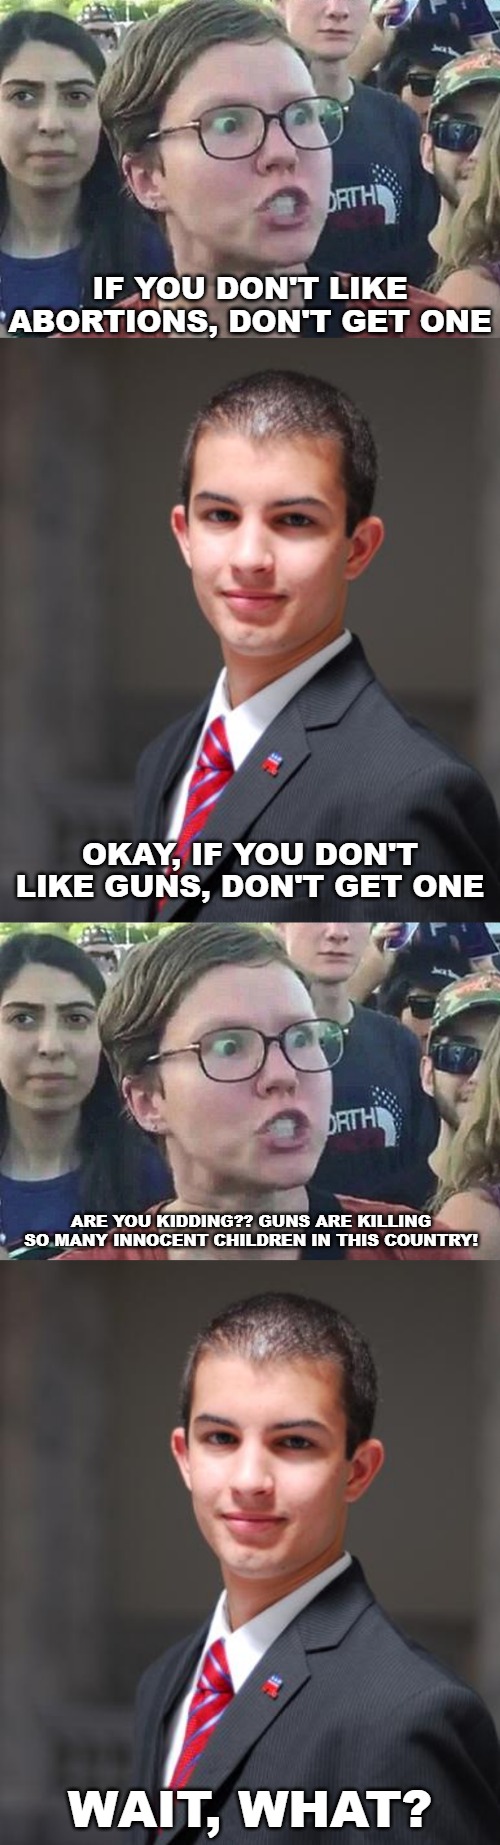 IF YOU DON'T LIKE ABORTIONS, DON'T GET ONE; OKAY, IF YOU DON'T LIKE GUNS, DON'T GET ONE; ARE YOU KIDDING?? GUNS ARE KILLING SO MANY INNOCENT CHILDREN IN THIS COUNTRY! WAIT, WHAT? | image tagged in college conservative,triggered liberal,abortion,second amendment | made w/ Imgflip meme maker